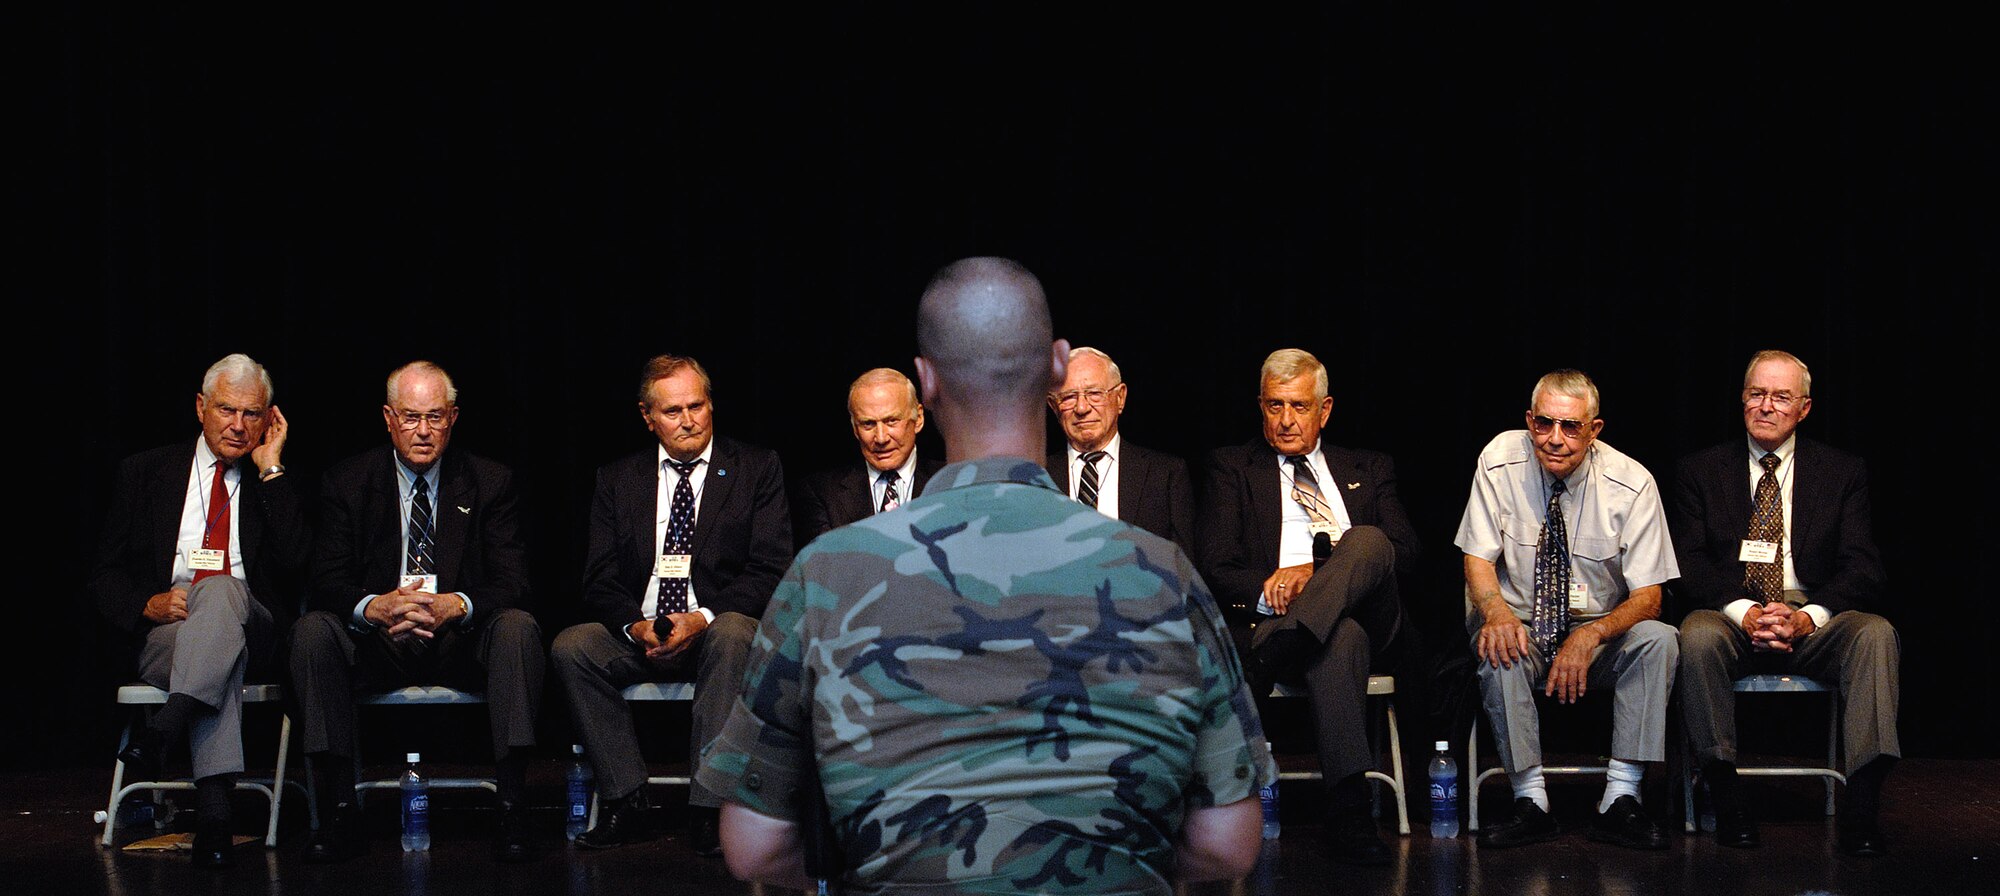 Retired Air Force members Lt. Gen. Charles G. Cleveland (from left), Maj. Gen. Carl G. Schneider, Col. Ralph Gibson, Col. Buzz Aldrin, Col. Pete Carpenter, Col. Ken Shealy, Col. Harold Fischer and Col. Robert Moxley, answer questions during an Air Force Call with nearly 150 Airmen from Yongsan Army Garrison, South Korea. (U.S. Air Force photo/Staff Sgt. Bennie J. Davis III) 
